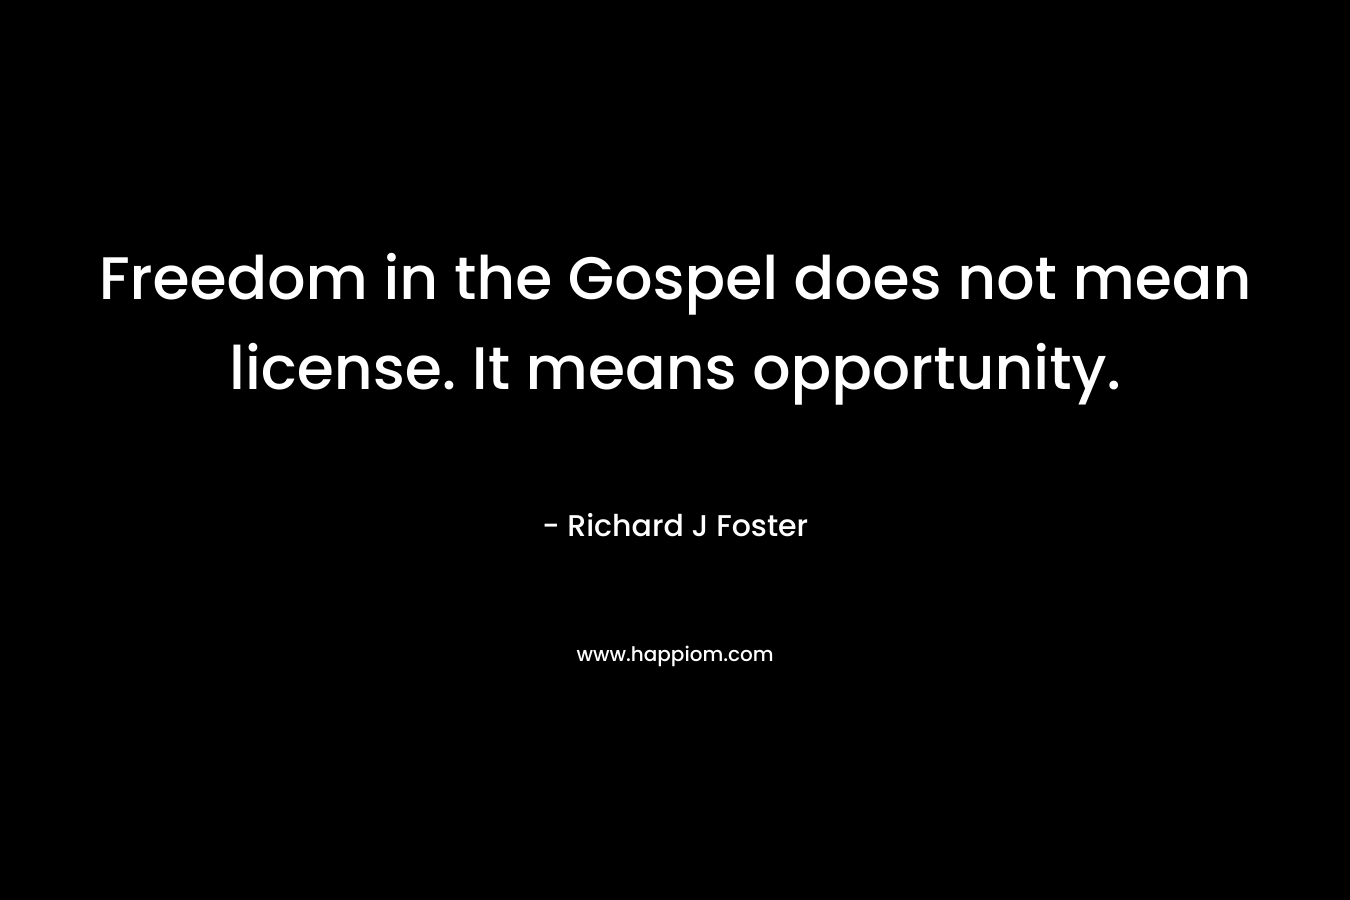 Freedom in the Gospel does not mean license. It means opportunity.